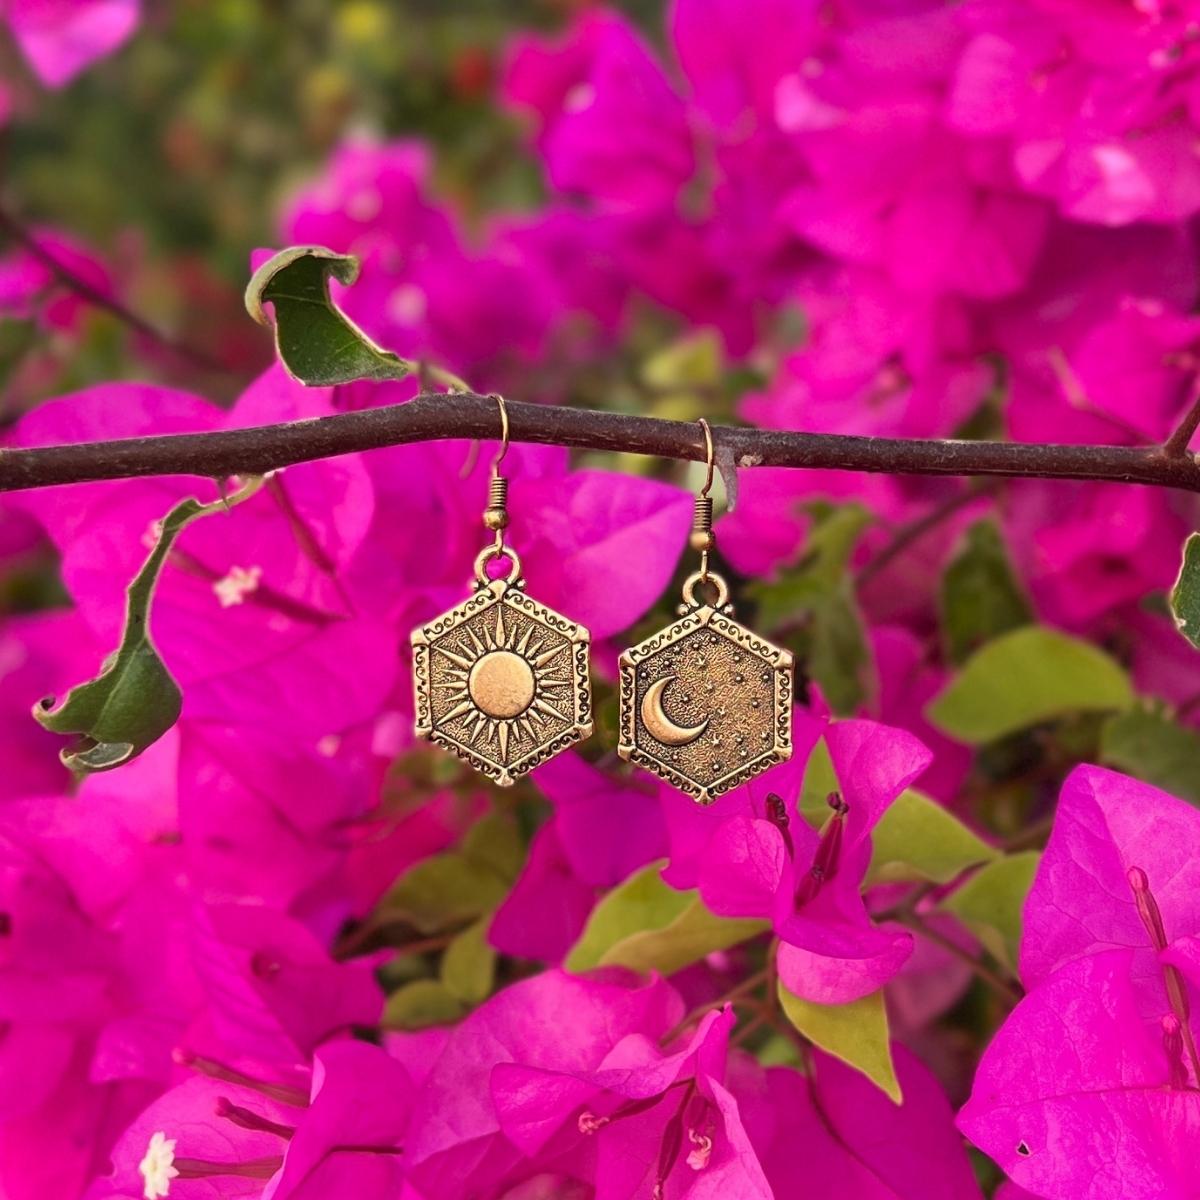 These Celestial Balance Earrings are crafted with love and intention for those who seek balance, harmony, and connection with the universe.